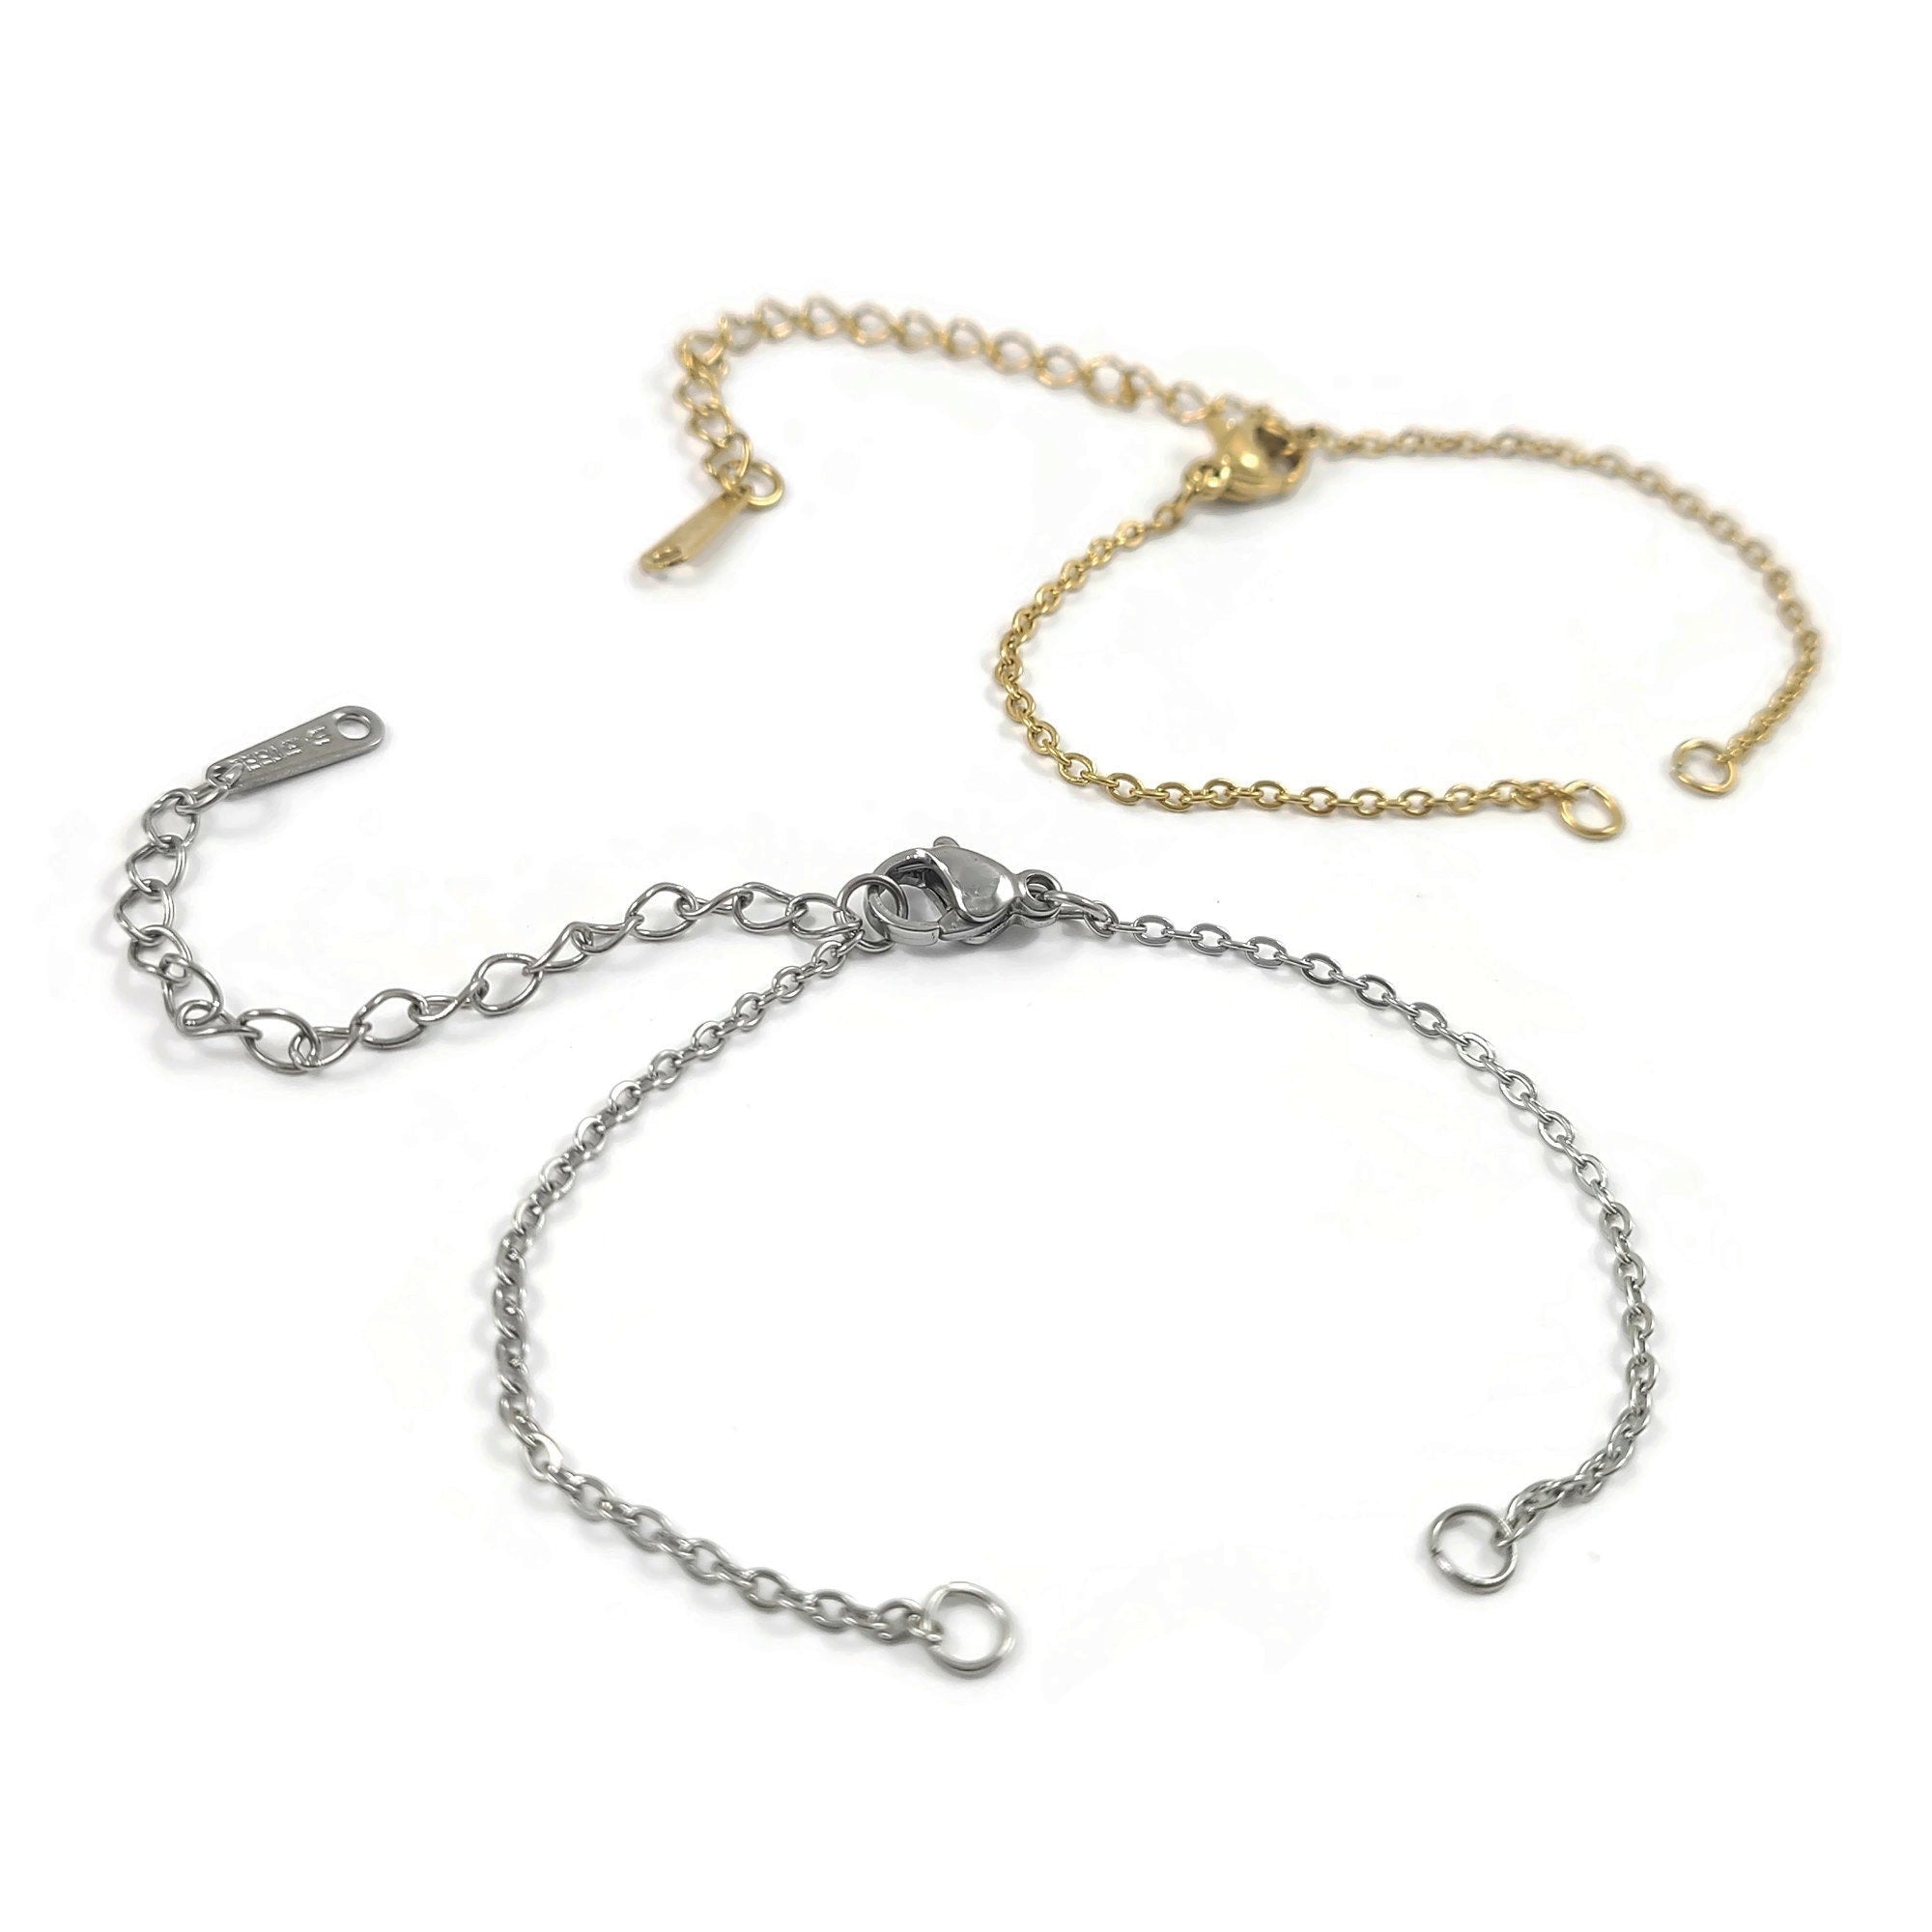 Dainty cable chain for bracelet making, Stainless steel, Bulk lot, Hypoallergenic jewelry finding supplies